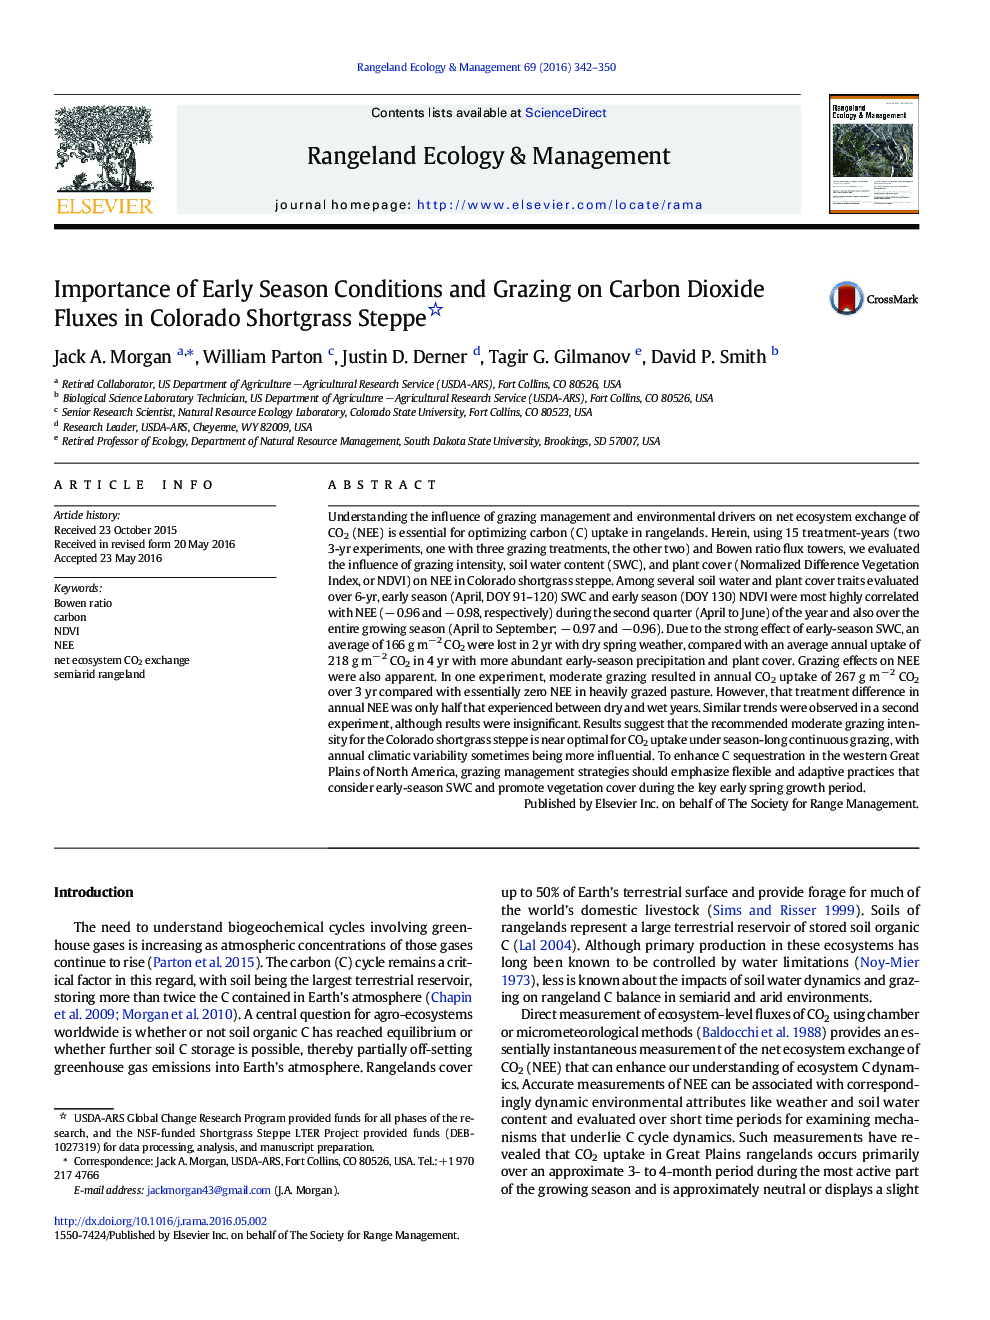 Importance of Early Season Conditions and Grazing on Carbon Dioxide Fluxes in Colorado Shortgrass Steppe